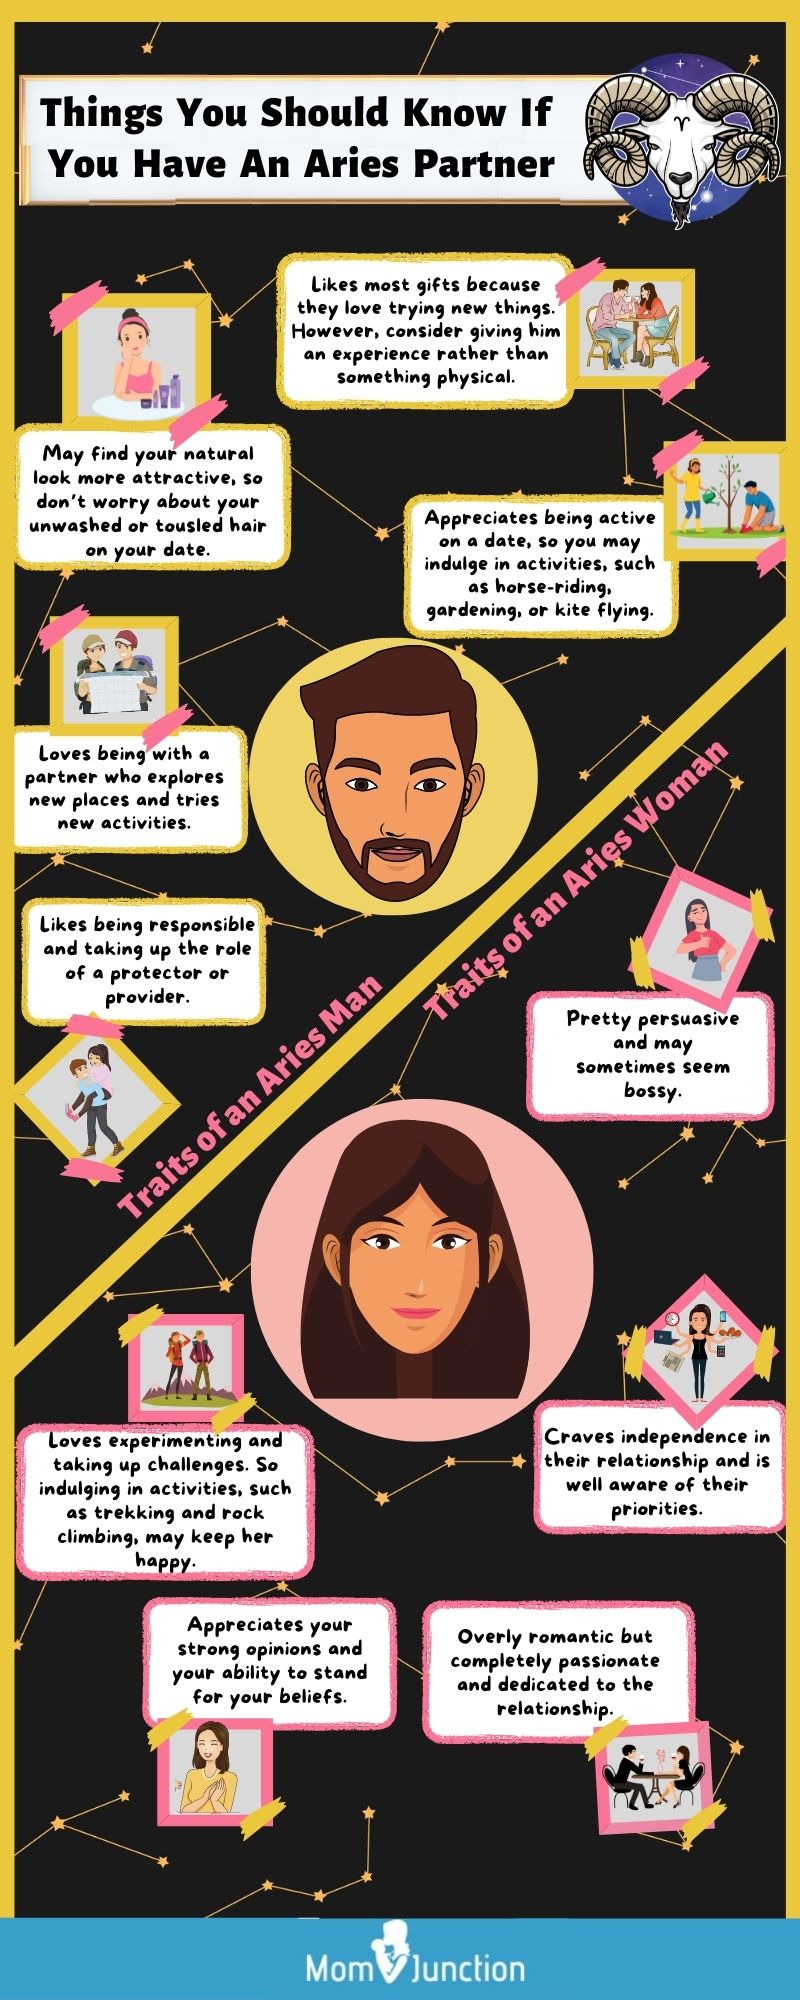 things you should know if you have an aries partner [infographic]